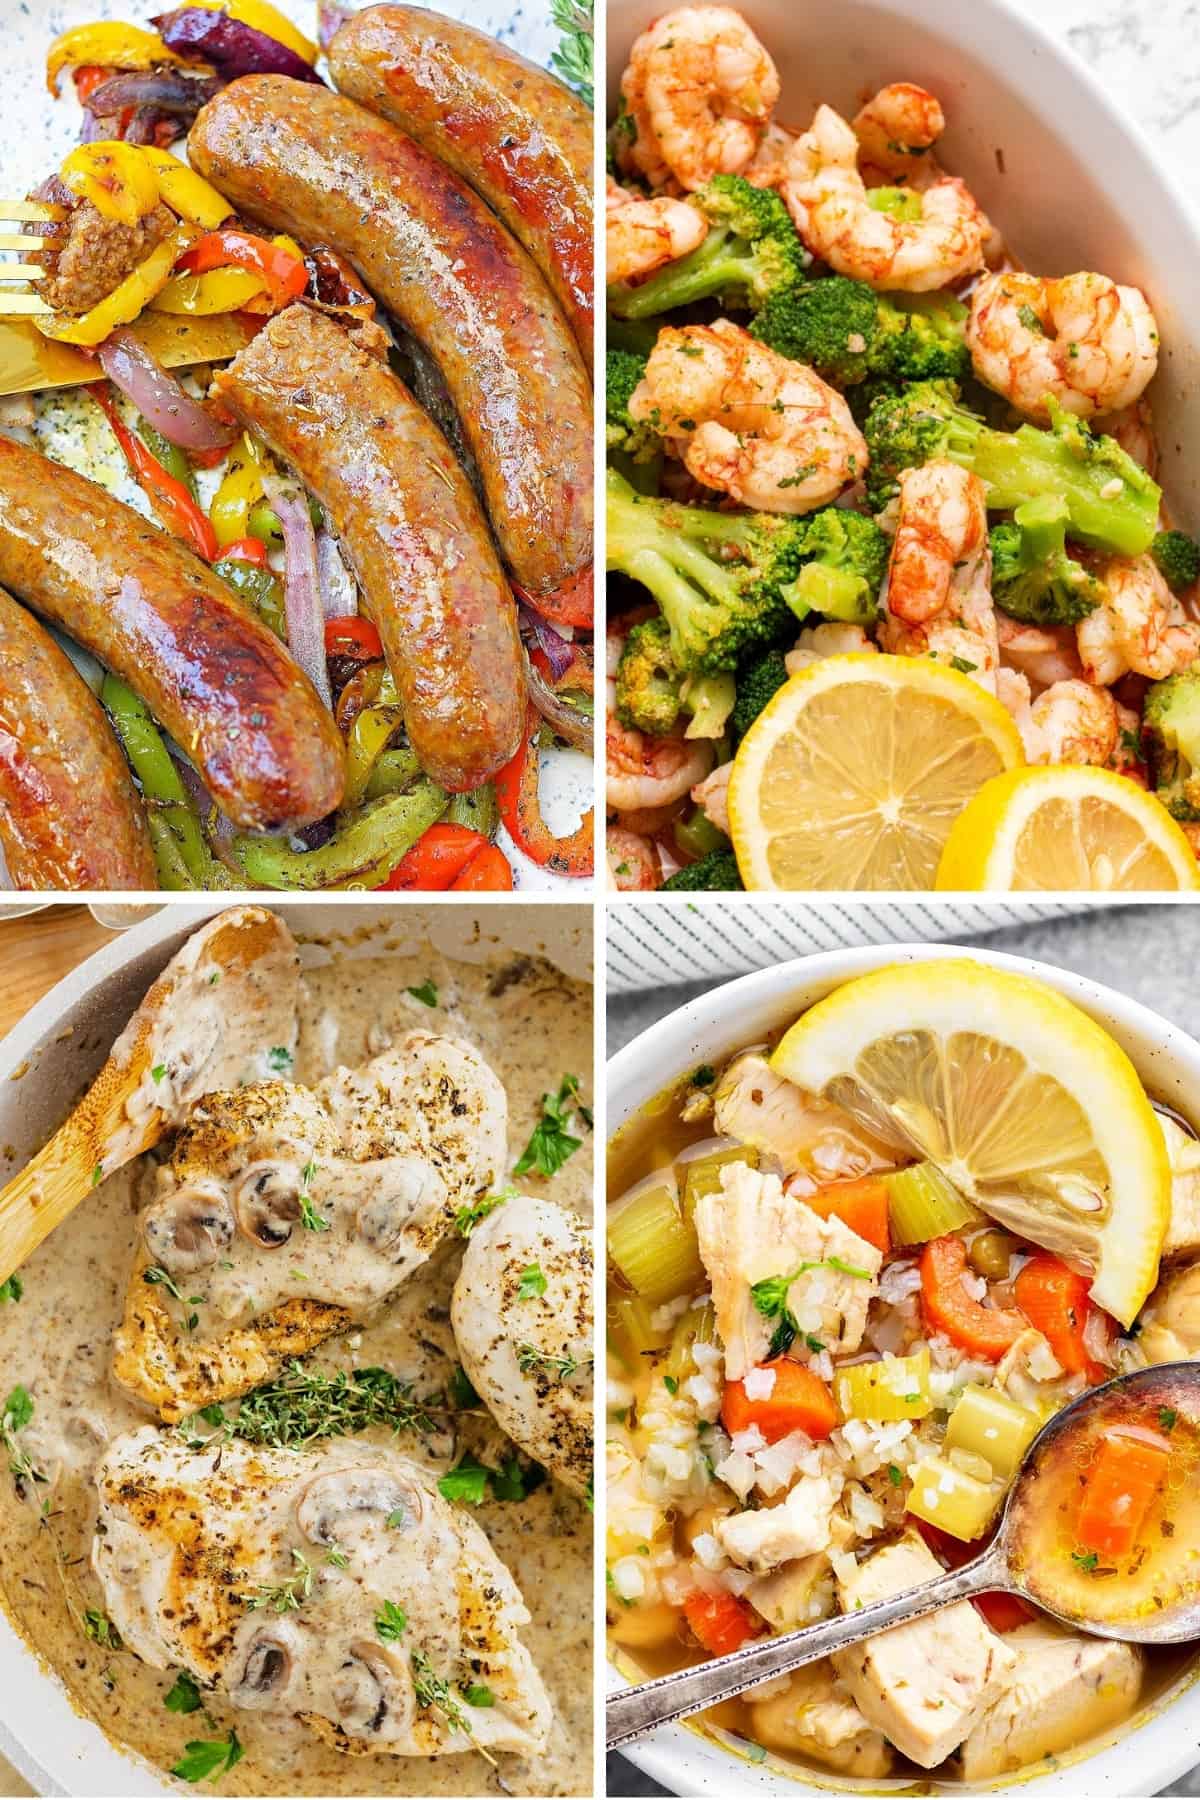 keto one pot meals like air fryer Italian sausage and peppers, air fryer frozen shrimp and broccoli, cream of mushroom chicken, and keto chicken vegetable soup